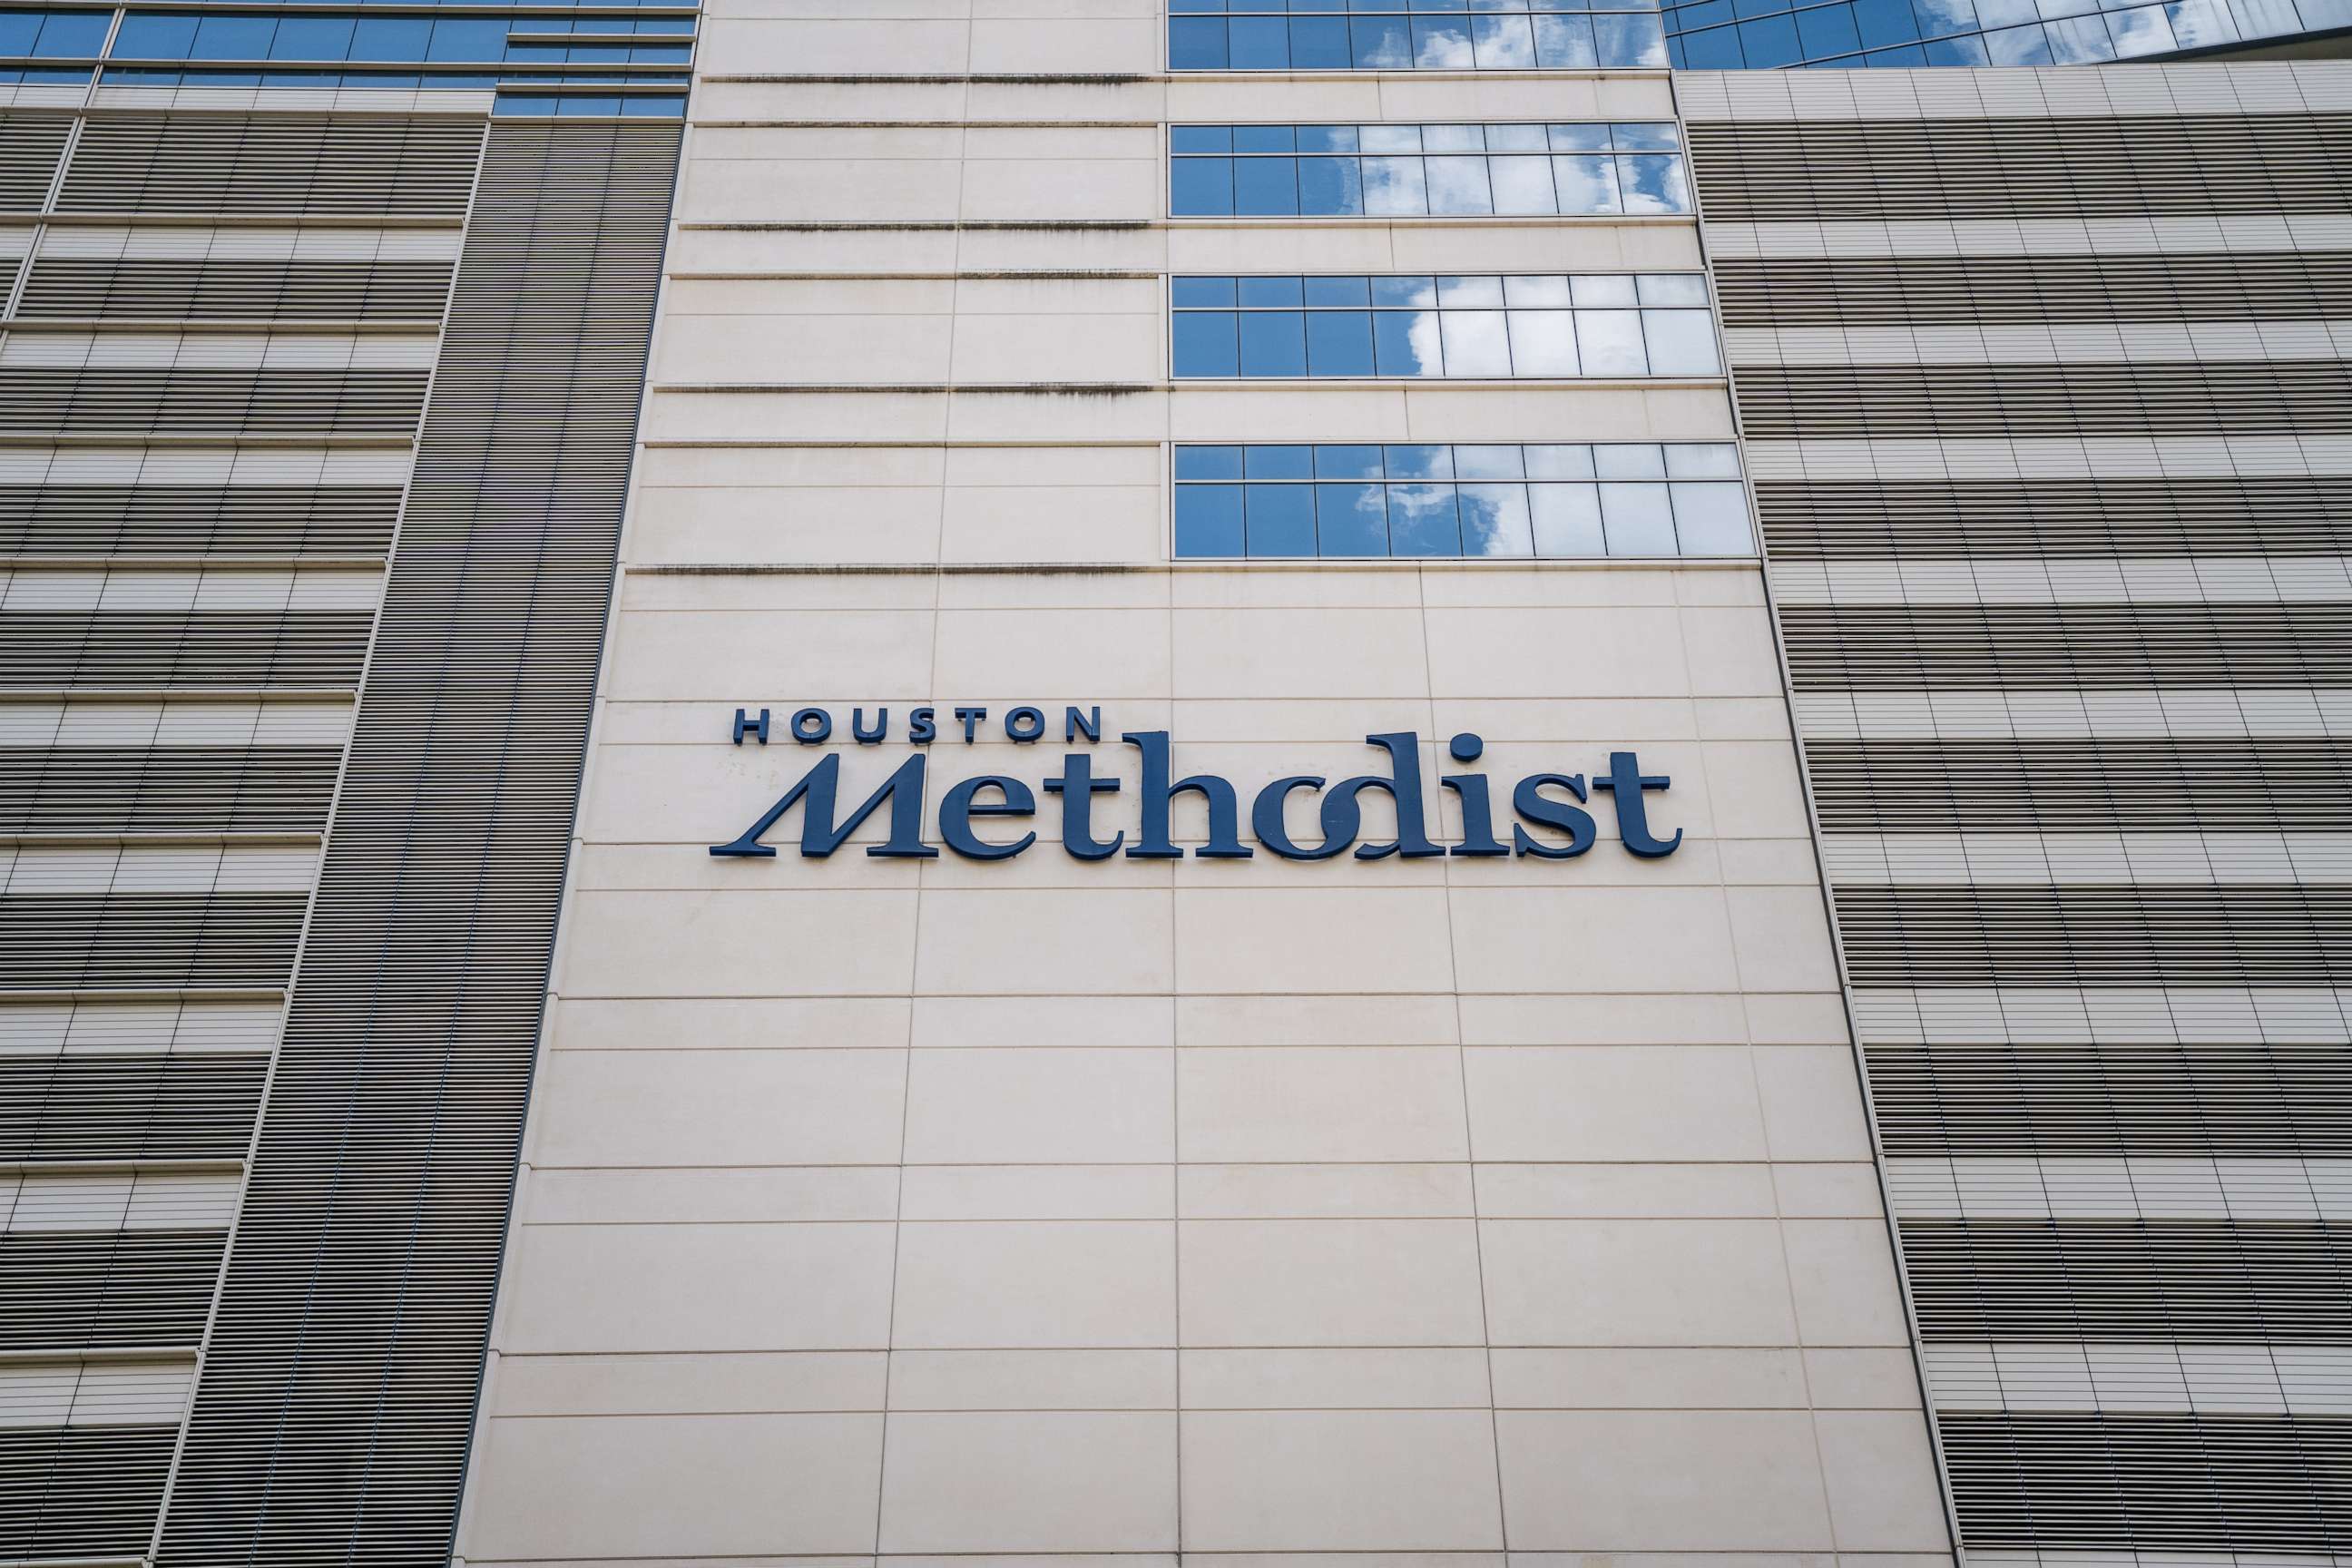 PHOTO: The exterior of the Houston Methodist Hospital is pictured on June 9, 2021 in Houston. Houston Methodist Hospital has suspended 178 employees without pay for 14 days for their refusal to comply with its COVID-19 vaccine requirement.